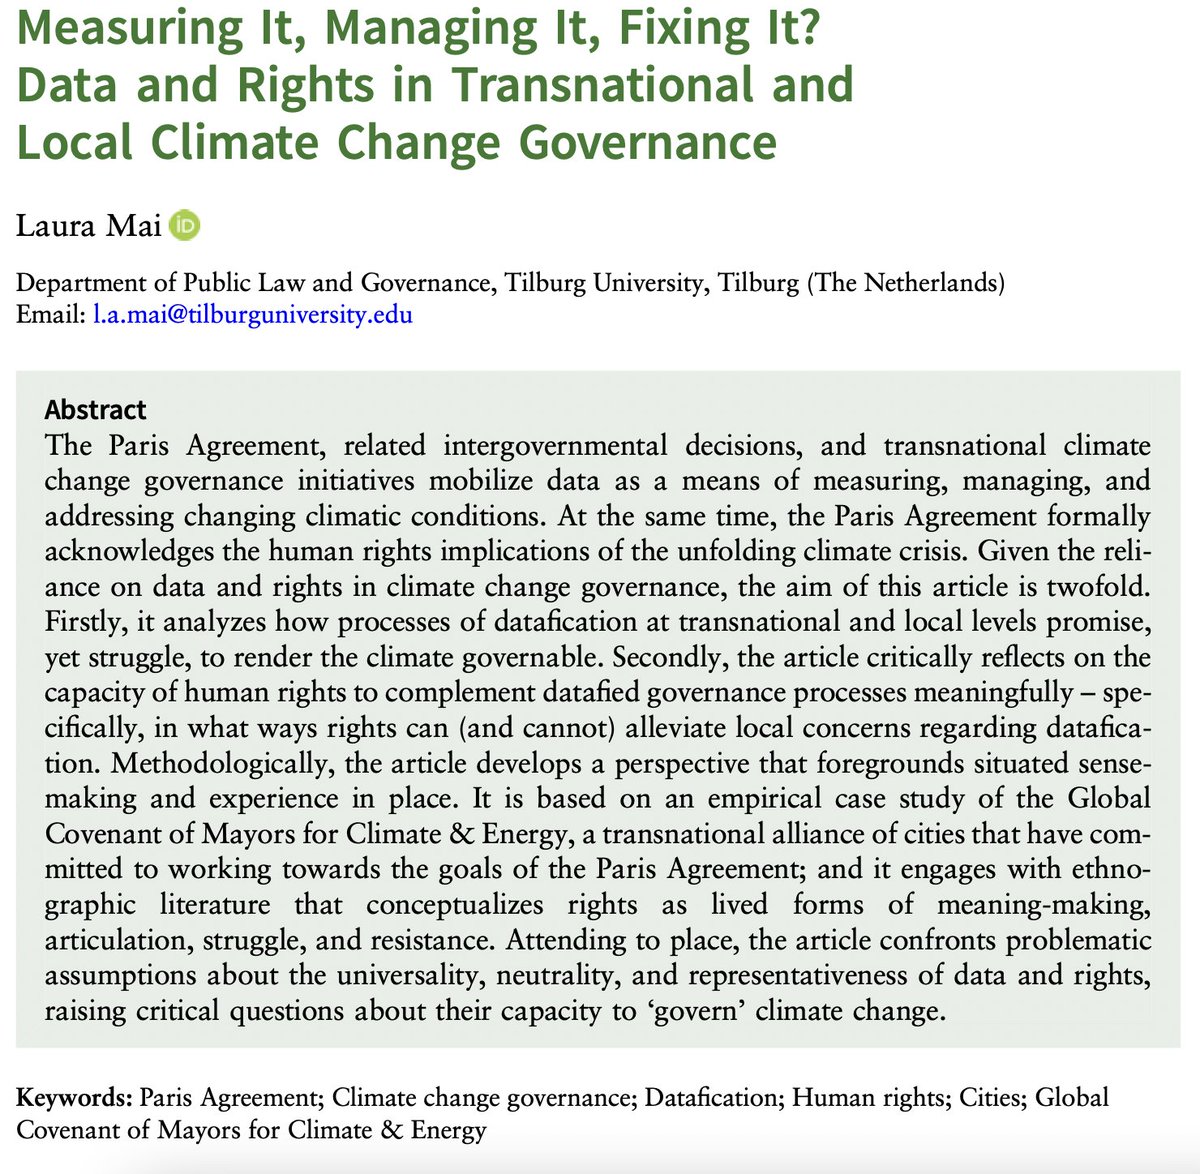 My article on the roles of data and rights in climate change governance is now available open access cambridge.org/core/journals/…